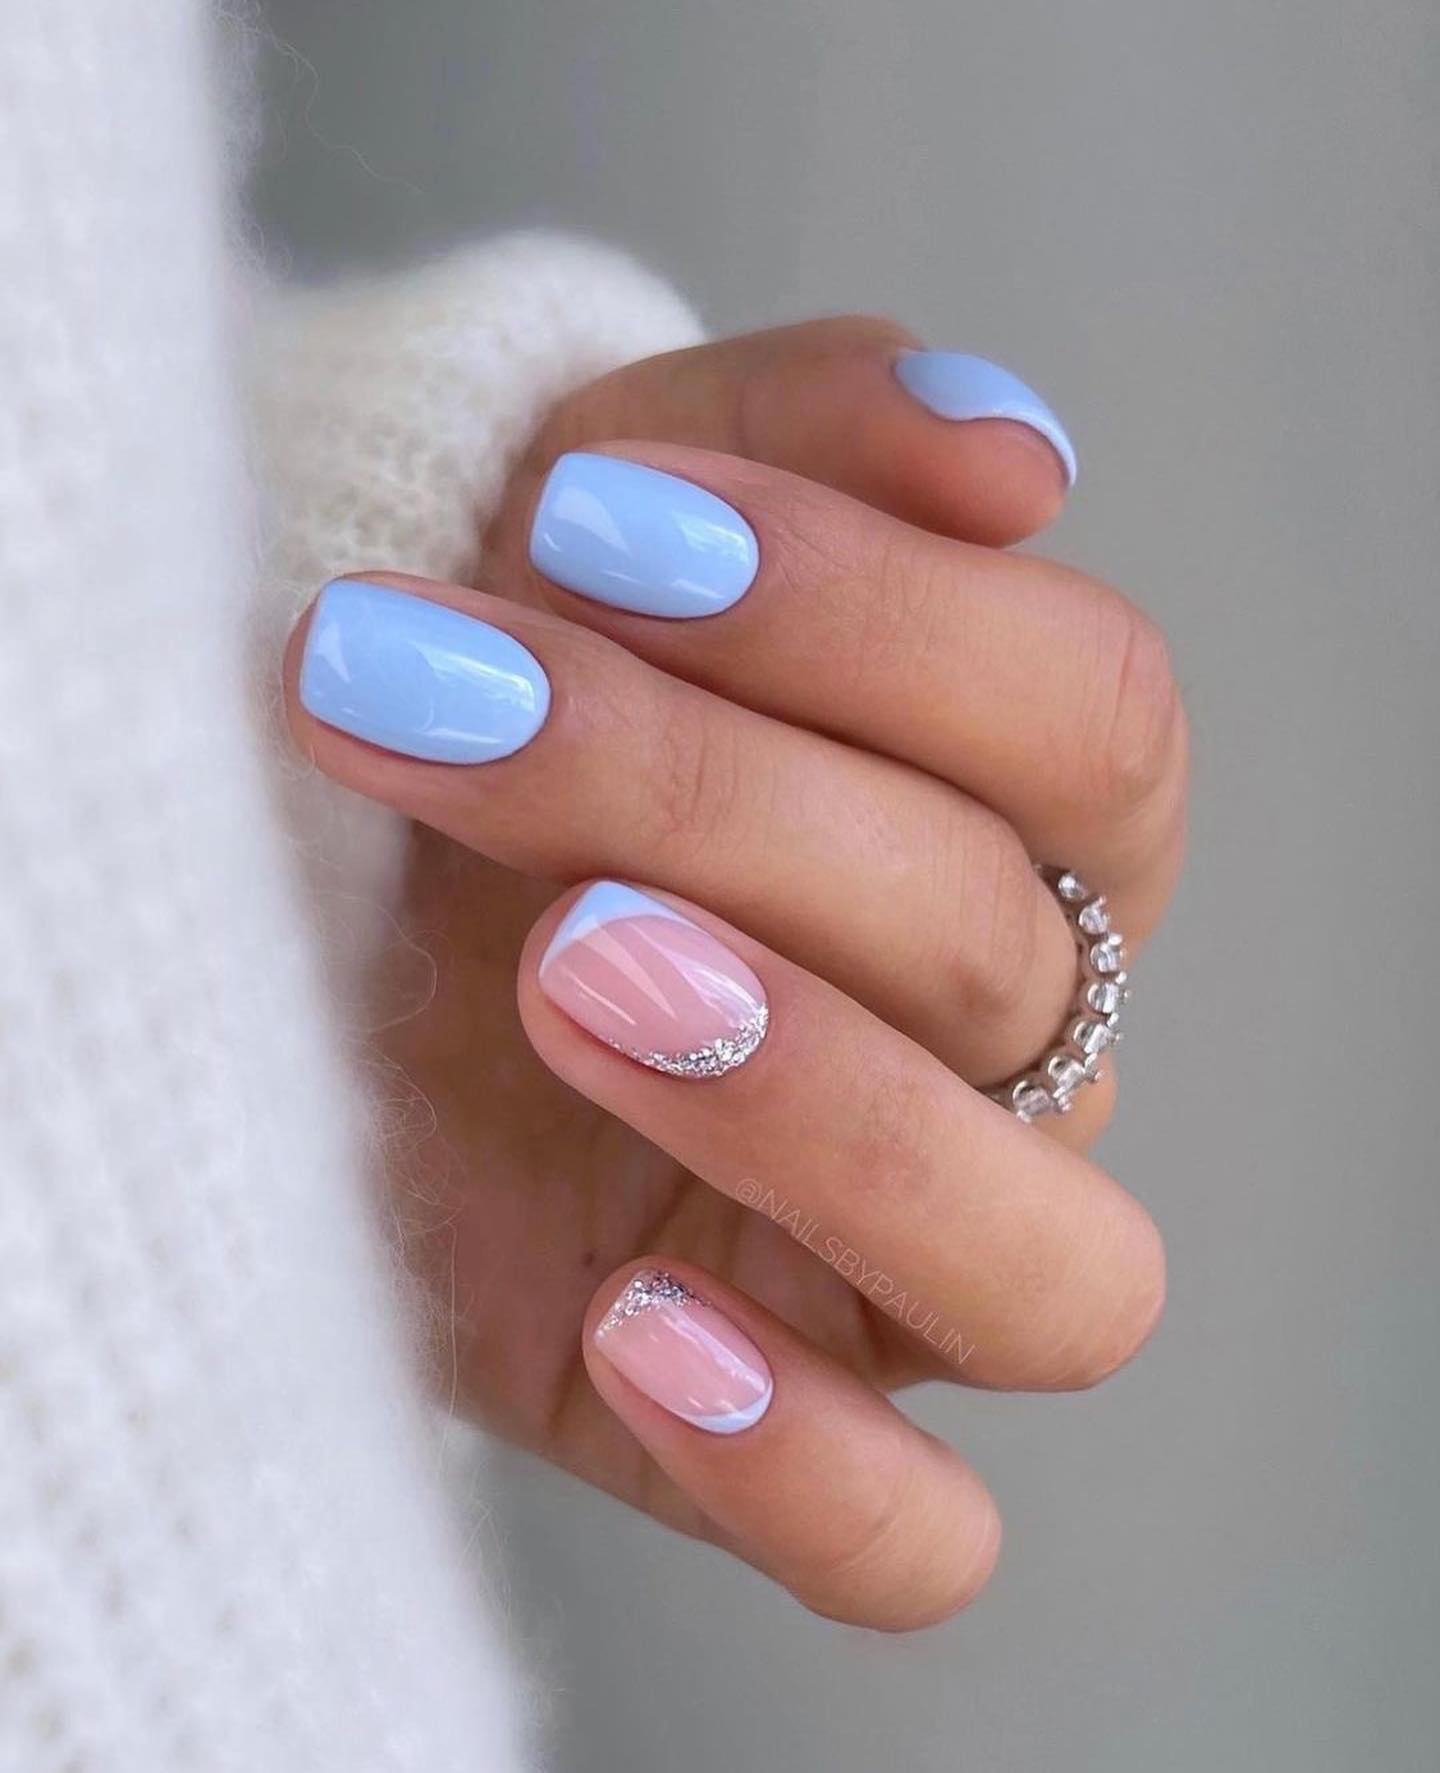 100 Of The Best Spring Inspired Nail Designs images 38